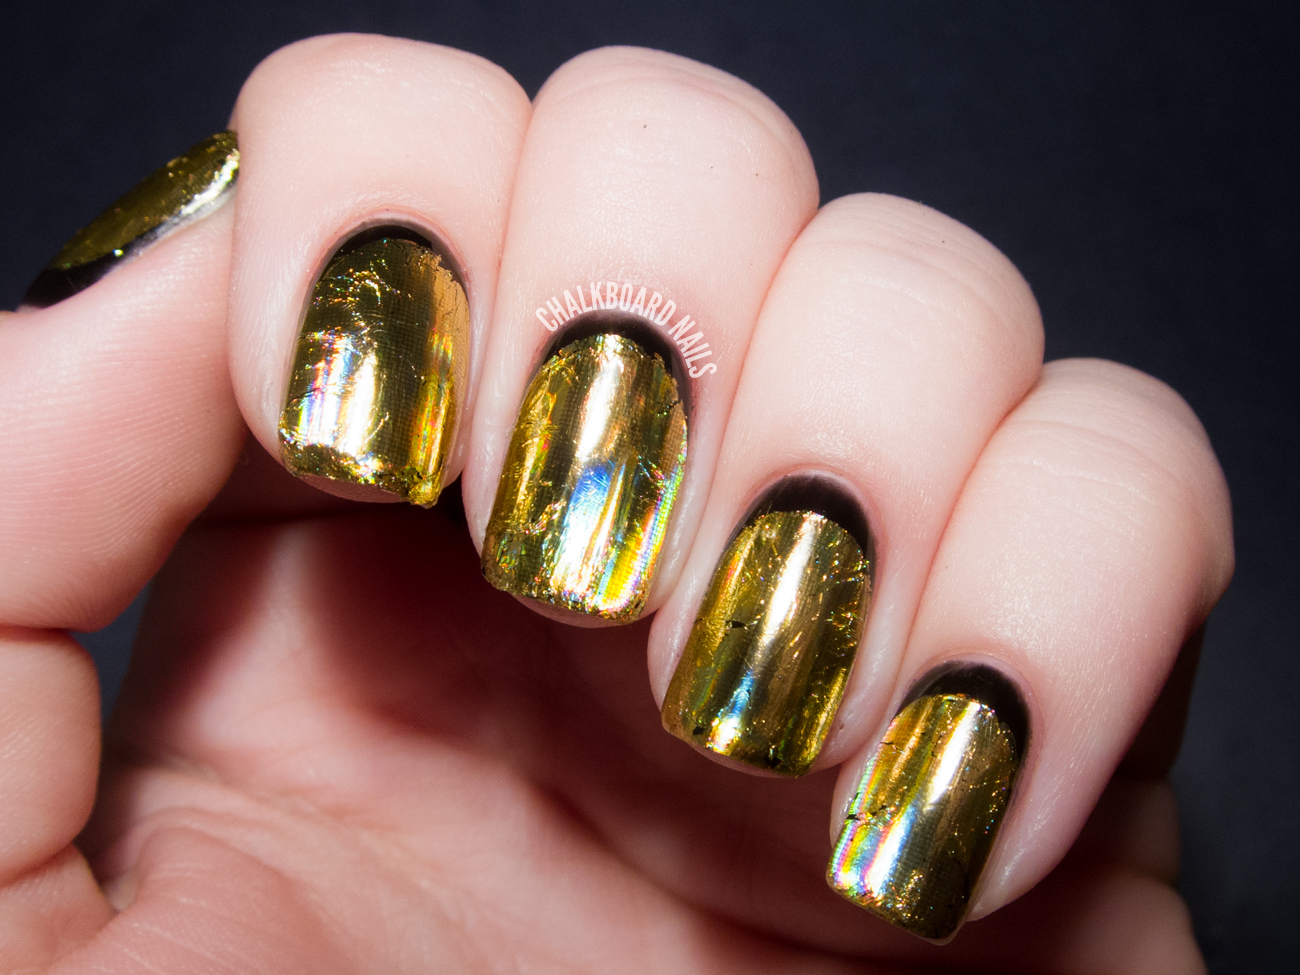 Black and Gold Nail Art - wide 8